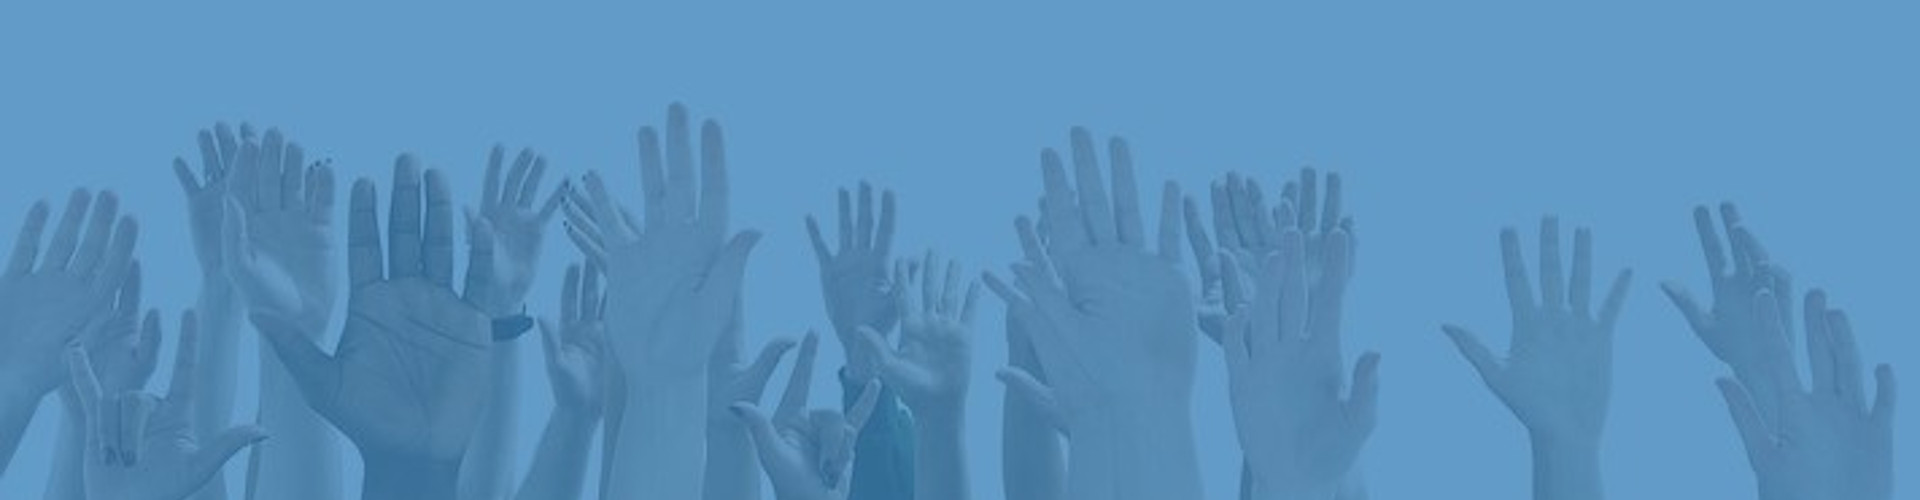 Original image from iStockPhoto/mangostock. A diversity of hands in a row are raised to vote and volunteer. A blue filter is overlaid the image to fit with the story theme.